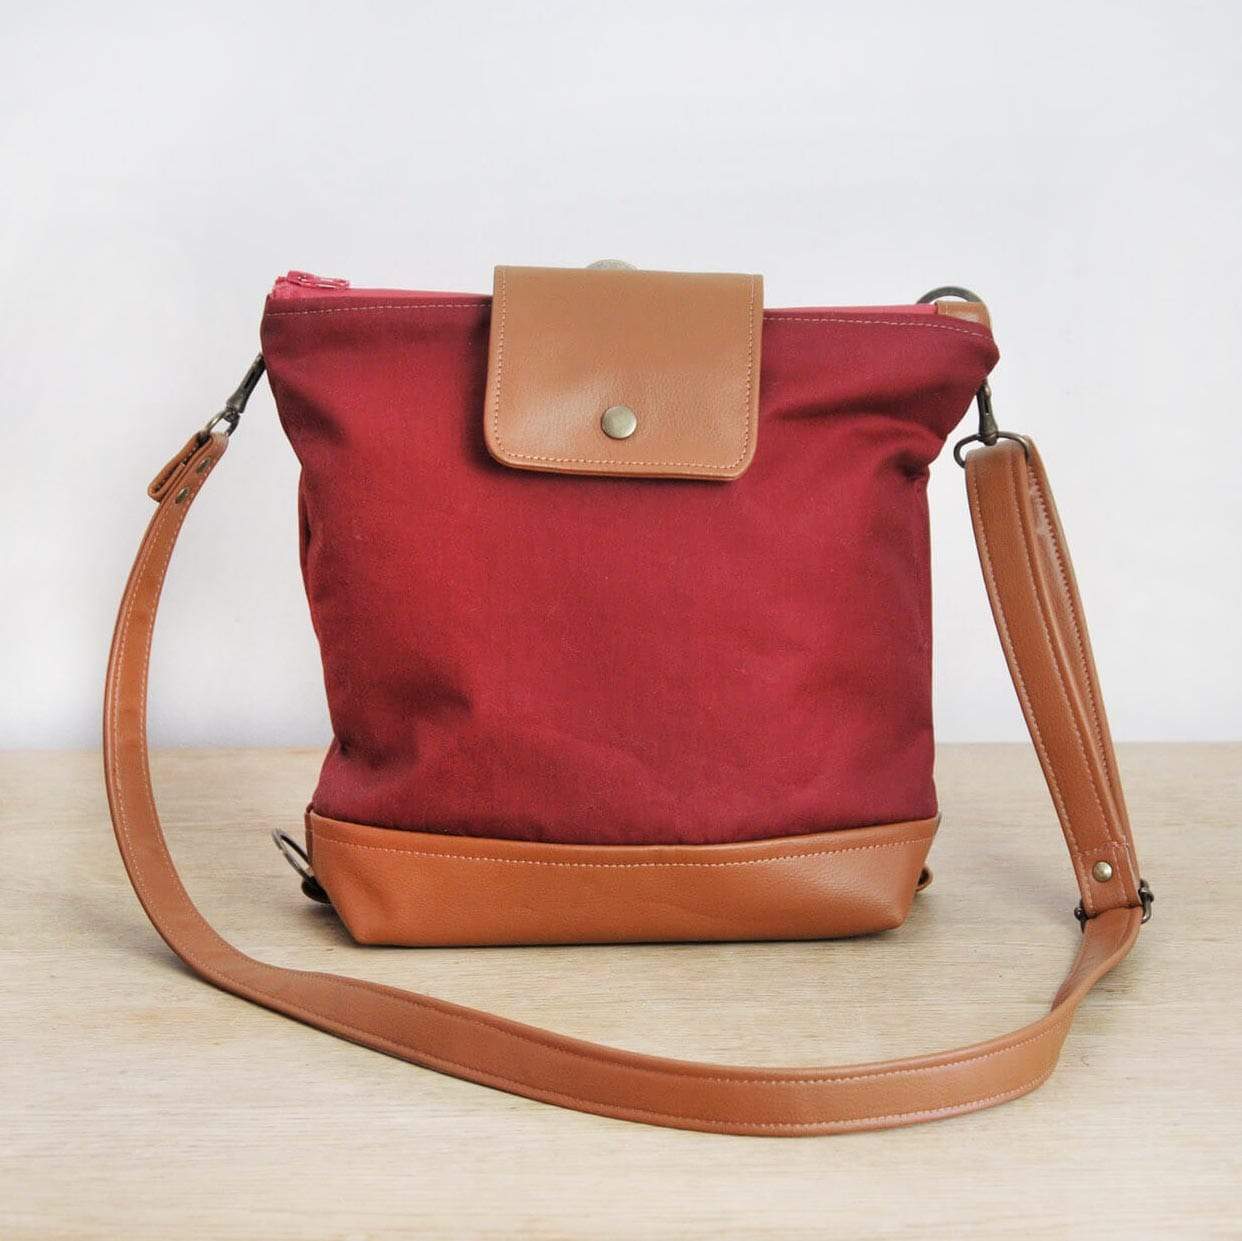 Thea 2-Way Leather Backpack